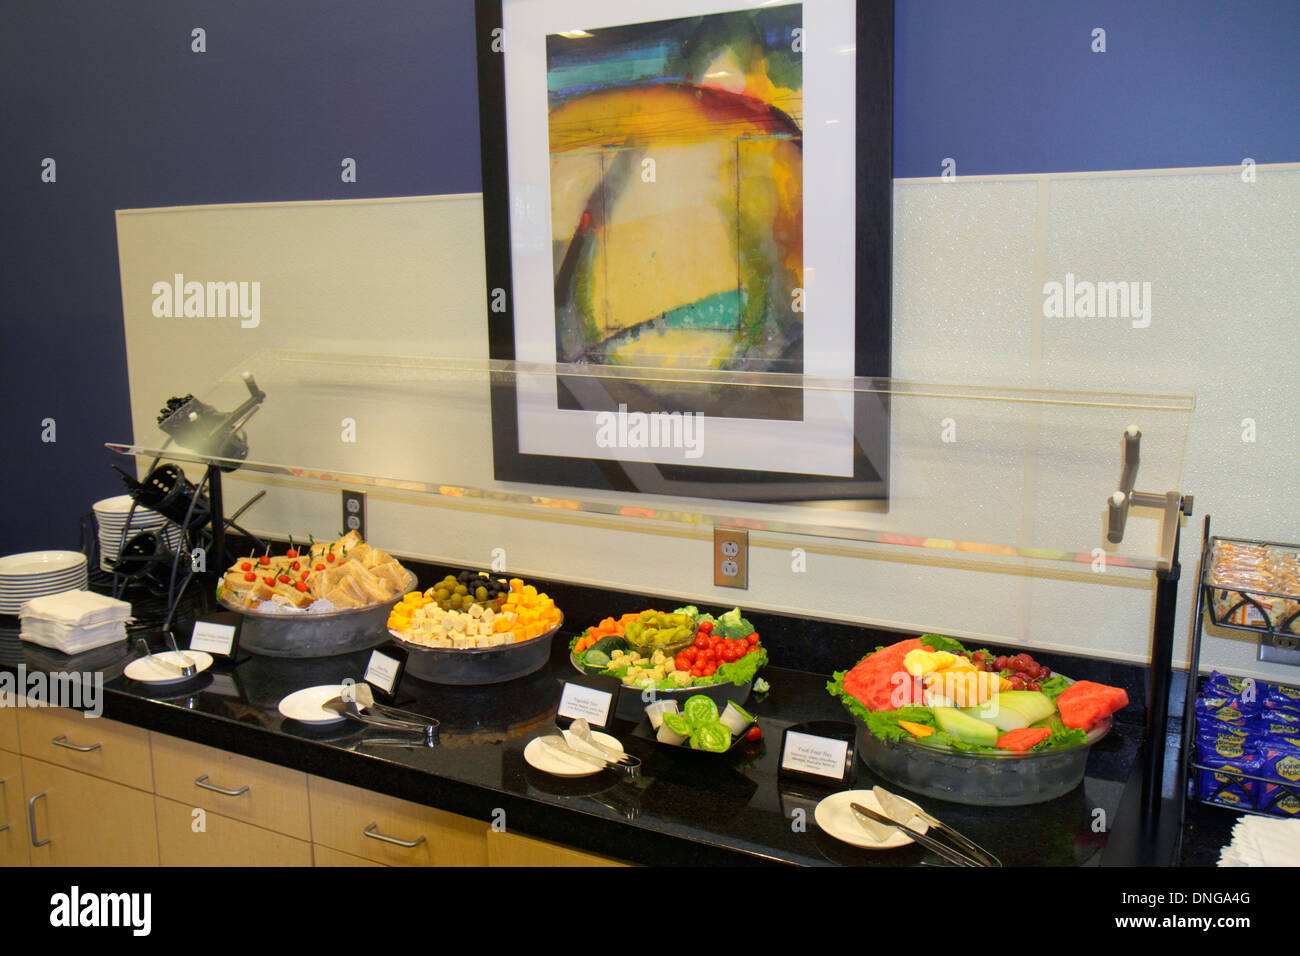 Texas,Houston,TX,Southwest,George Bush Intercontinental Airport,IAH,terminal,gate,Executive Club,airport lounge,class,buffet style table,food,looking Stock Photo